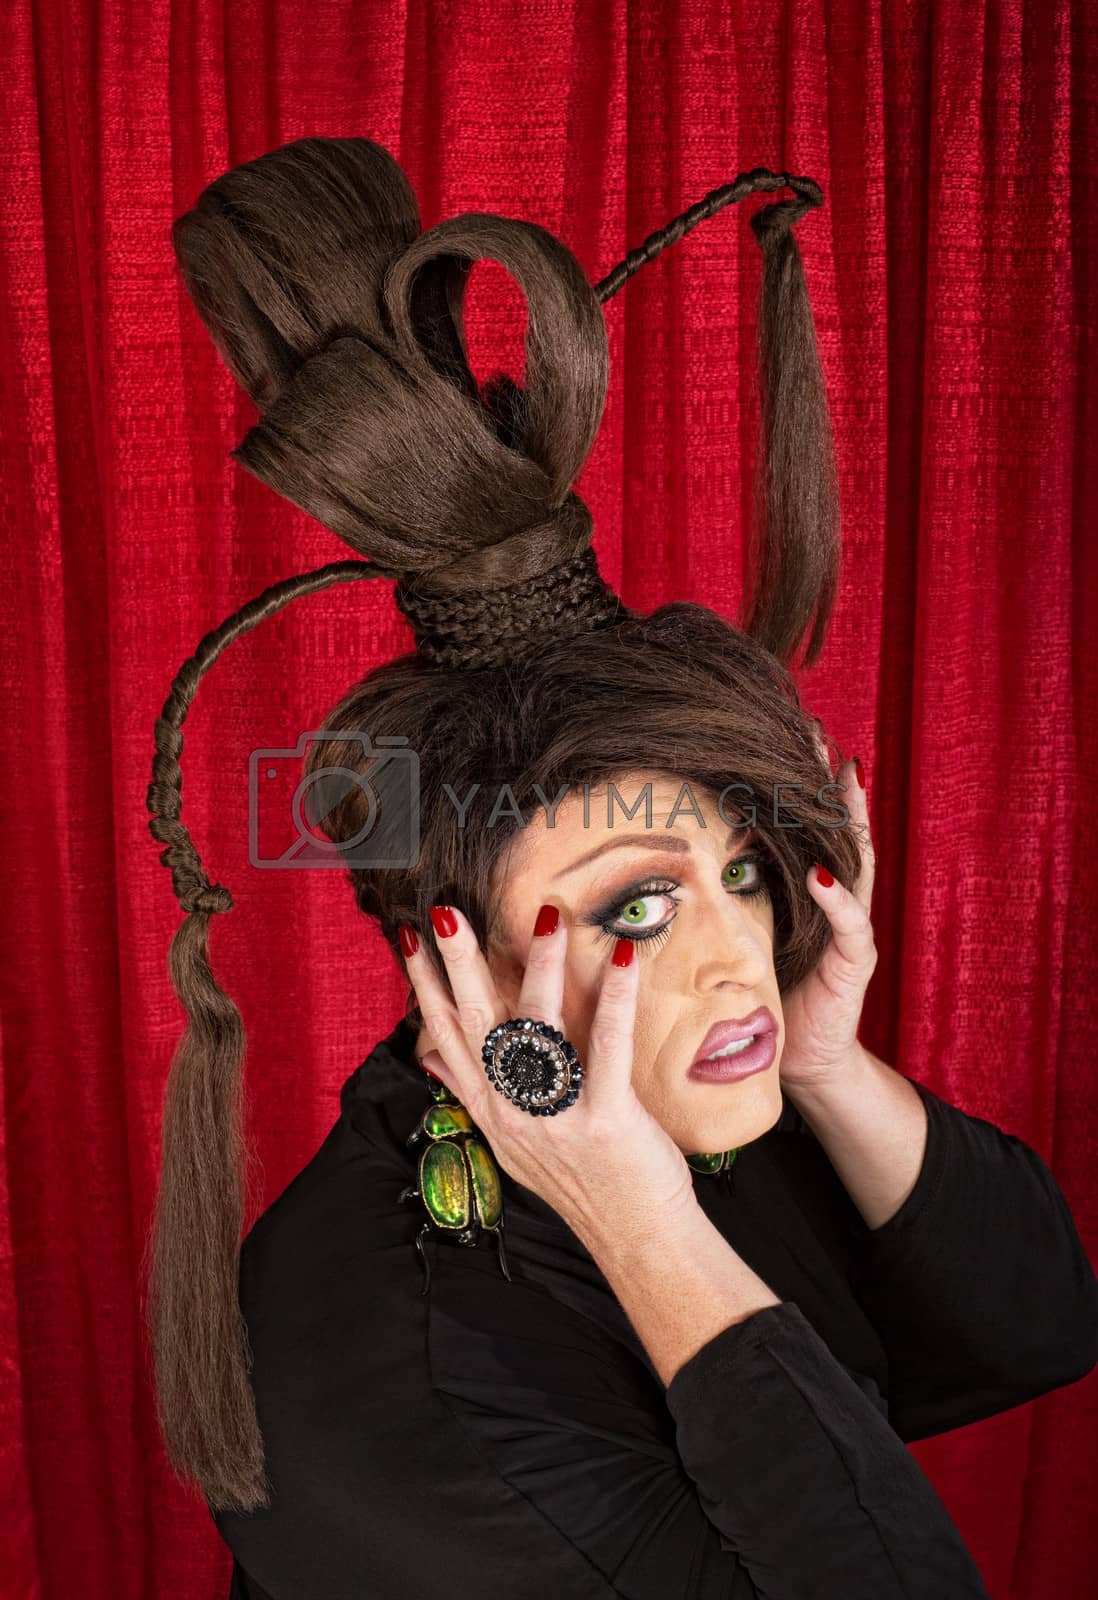 Royalty free image of Frightened Drag Queen by Creatista